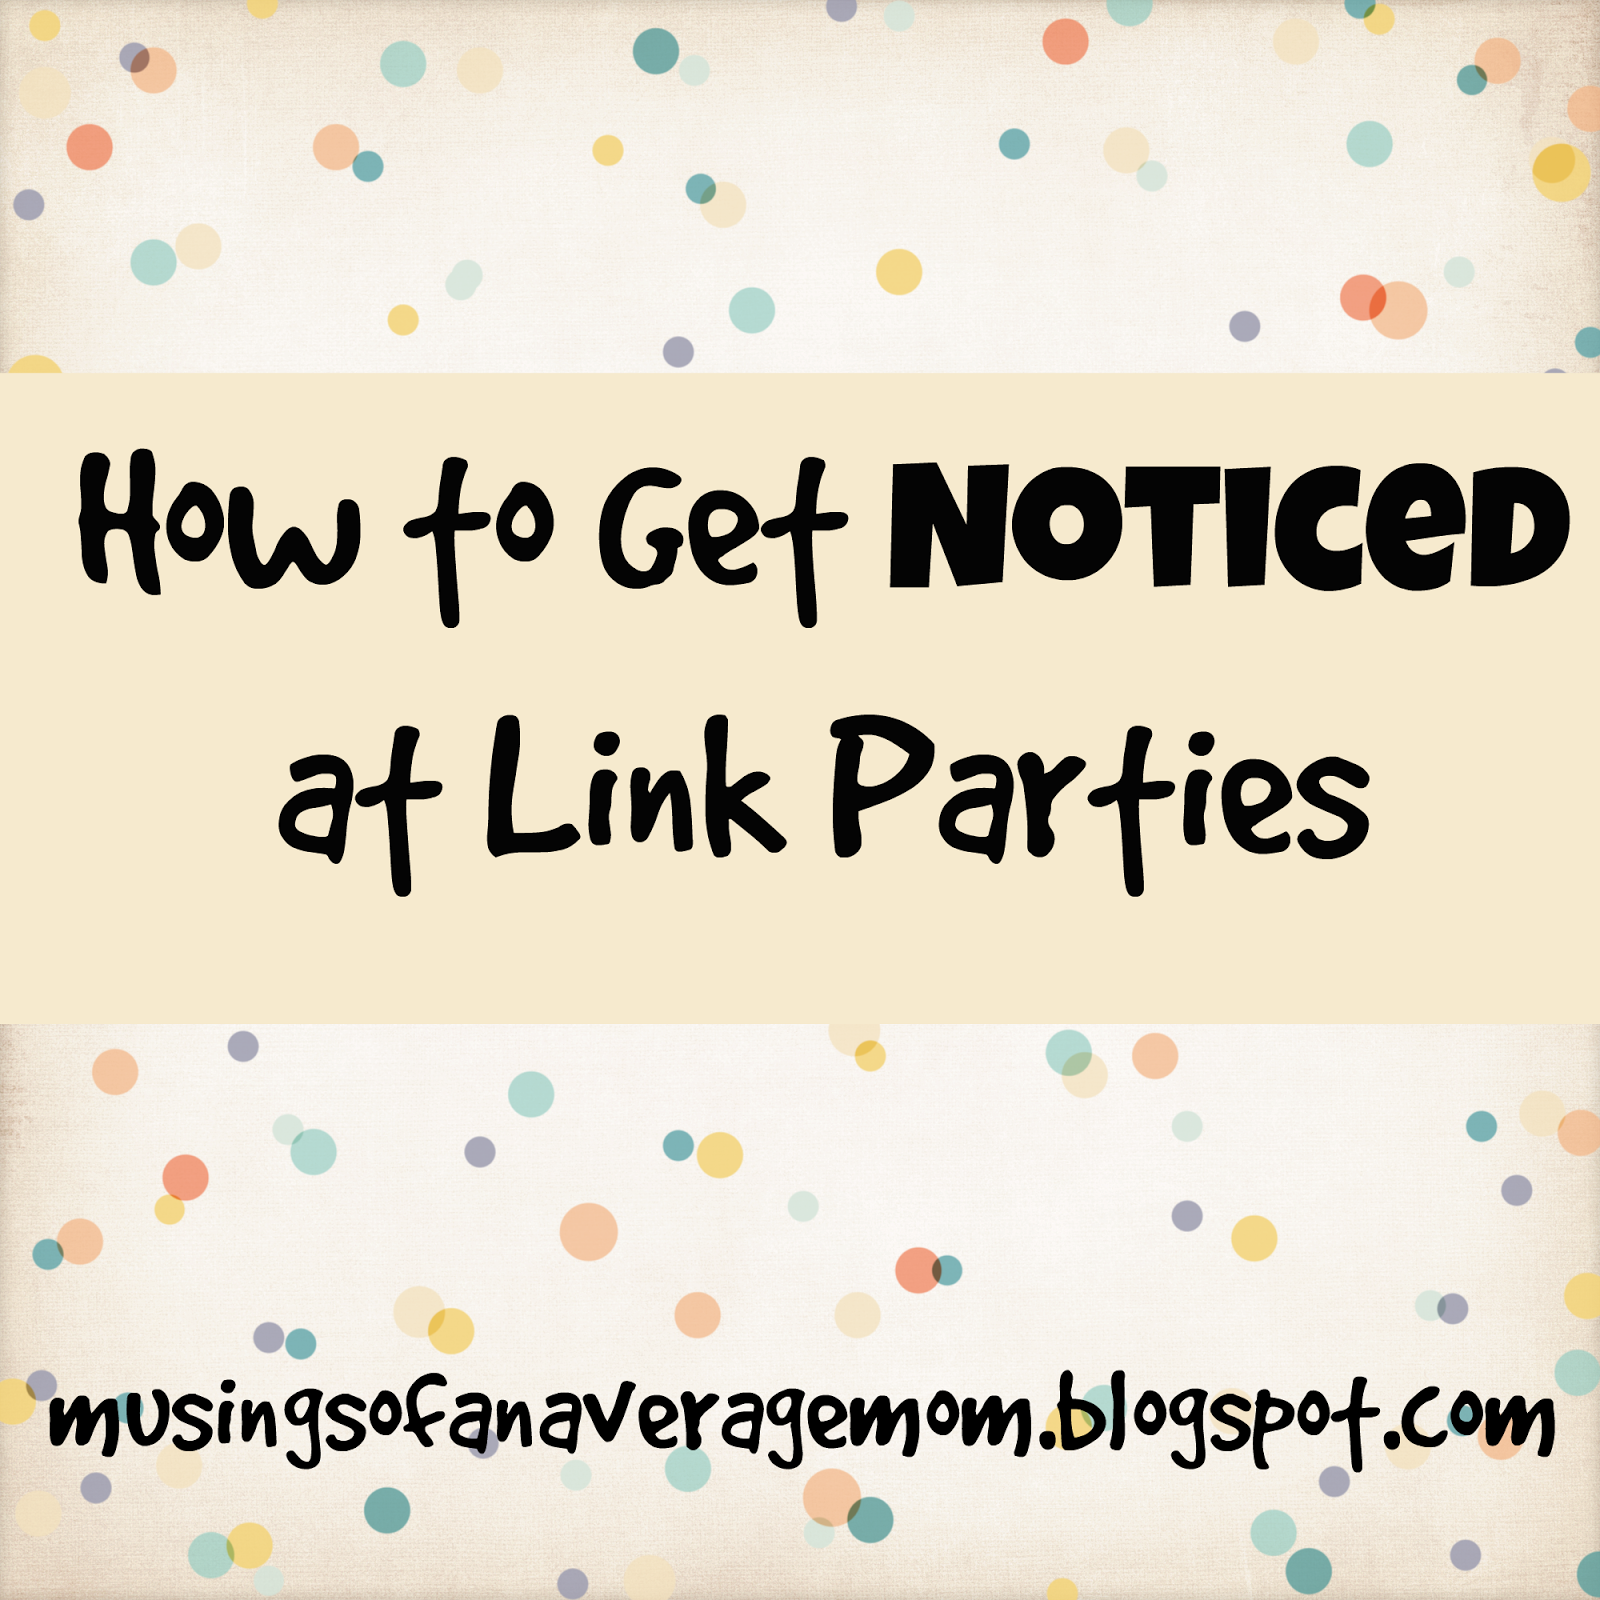 How to Get Noticed at Link Parties